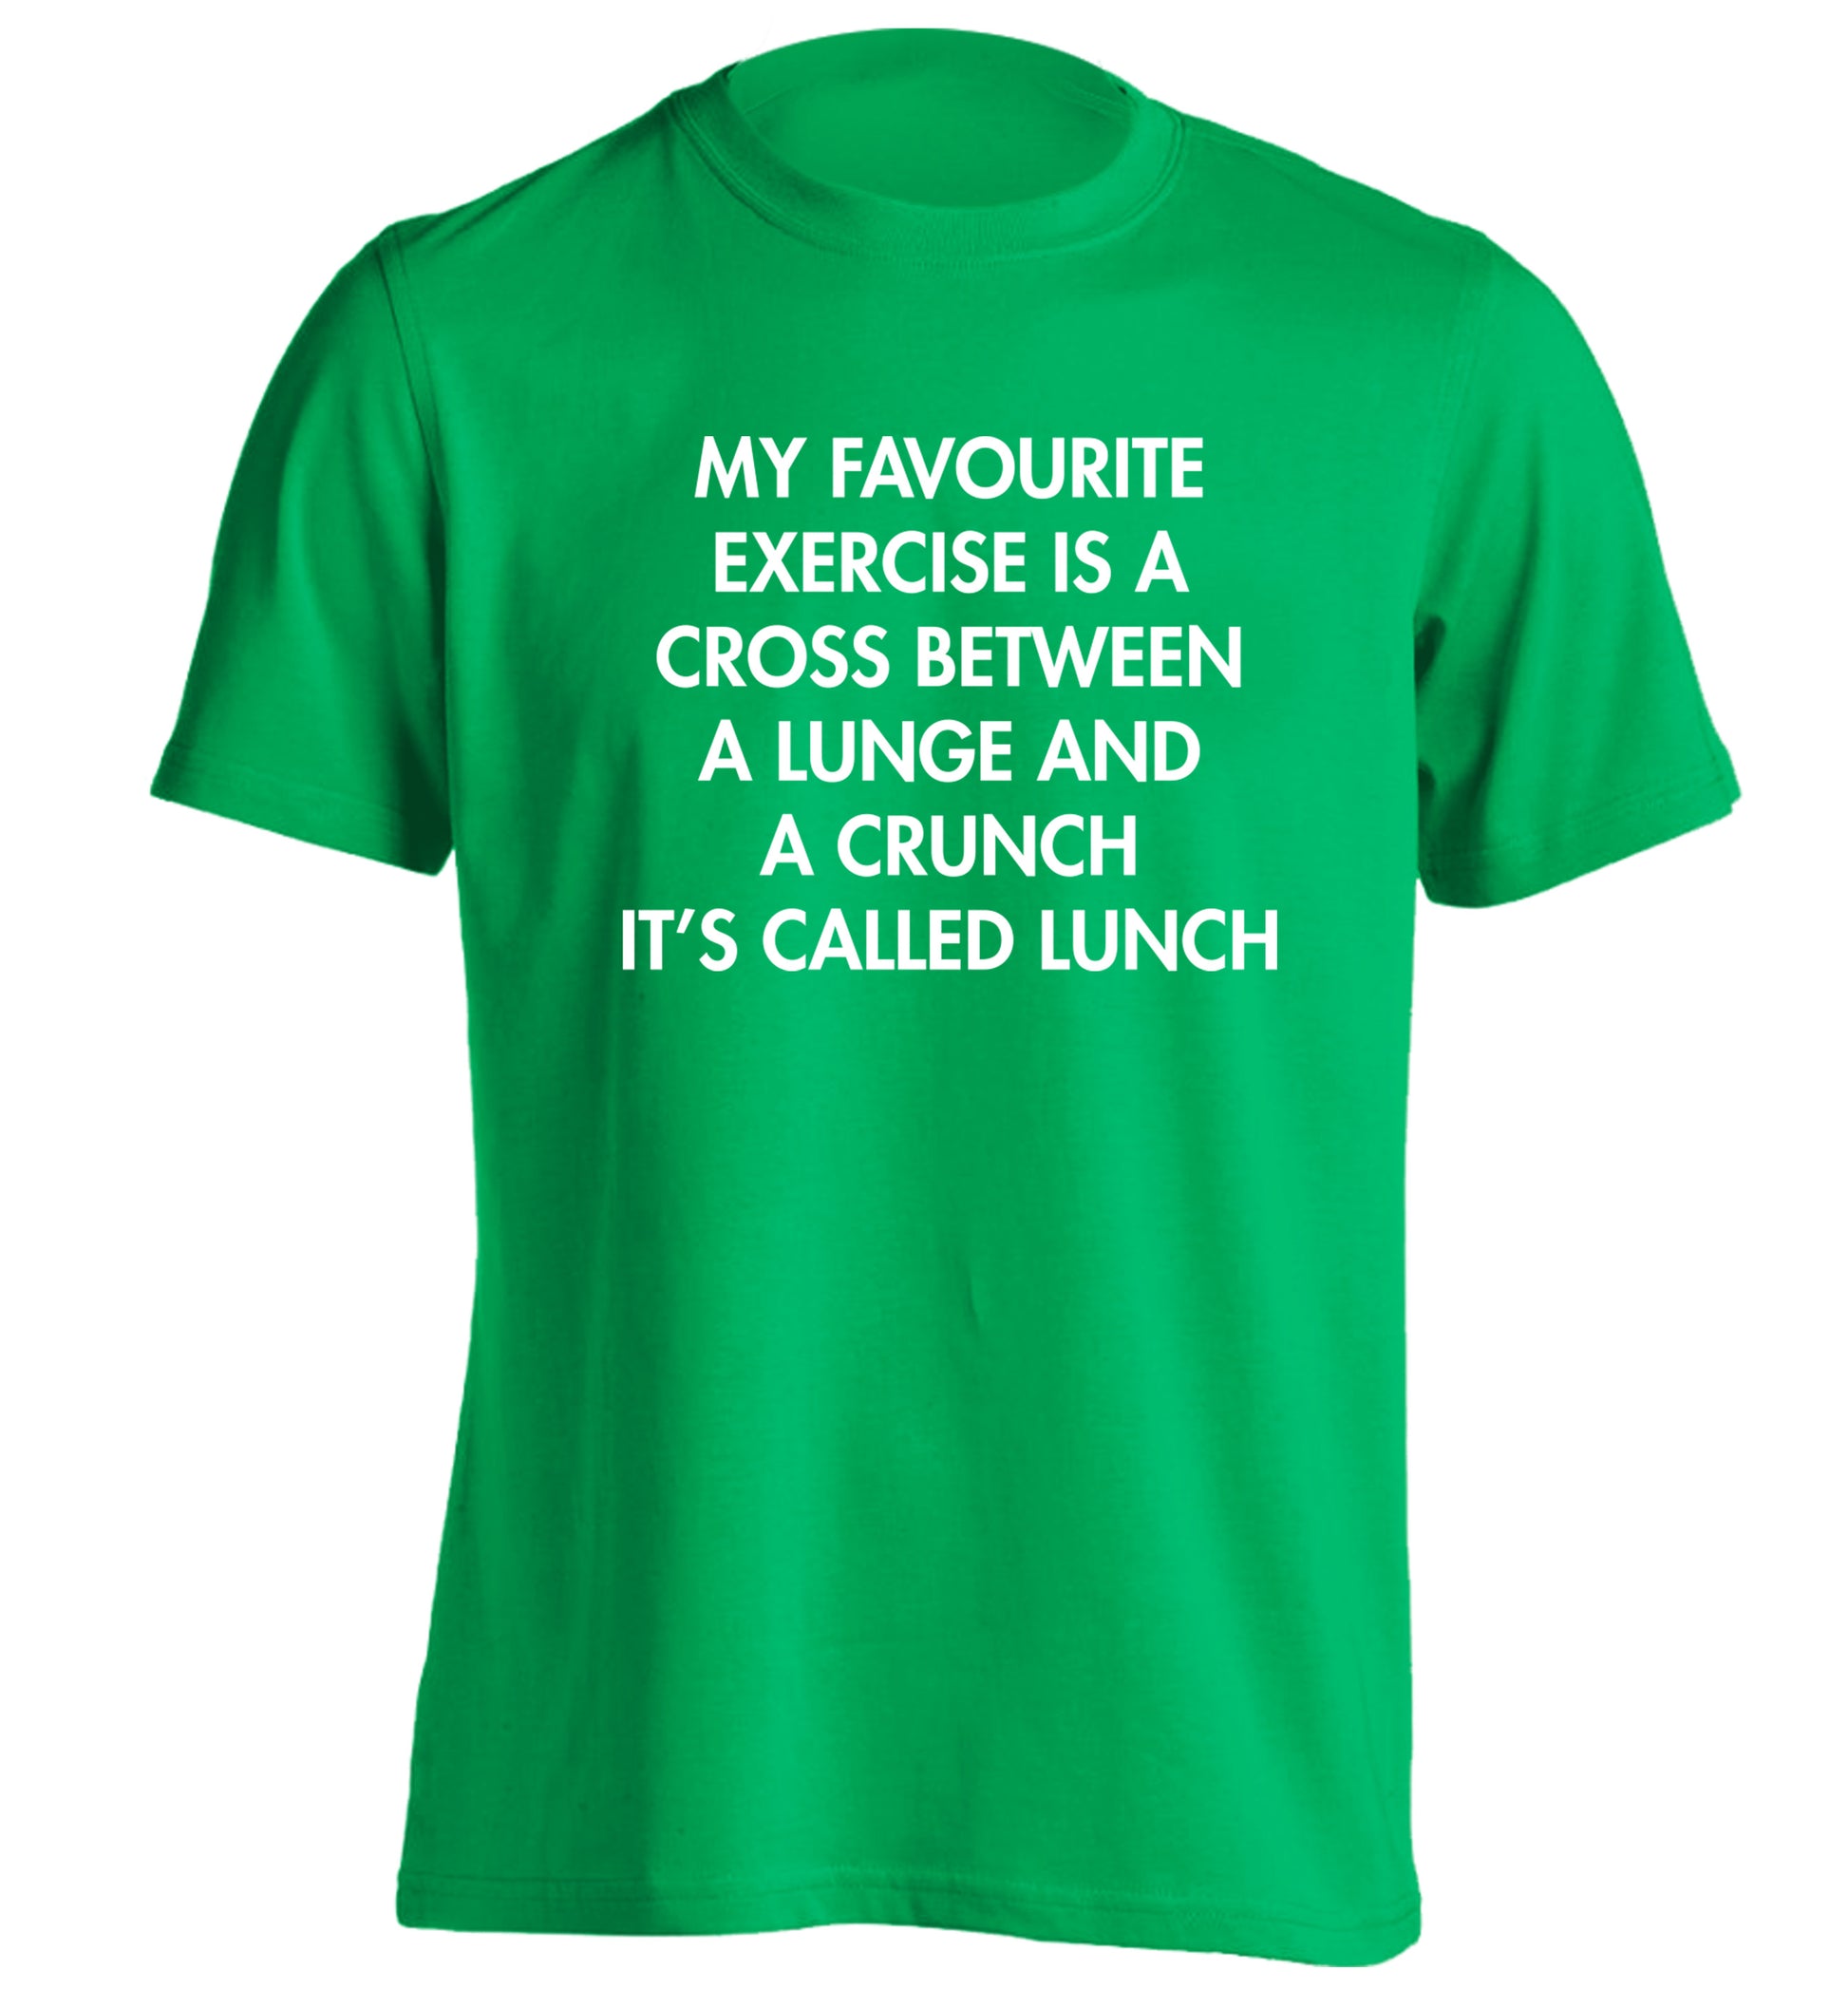 My favourite exercise is a cross between a lung and a crunch it's called lunch adults unisex green Tshirt 2XL